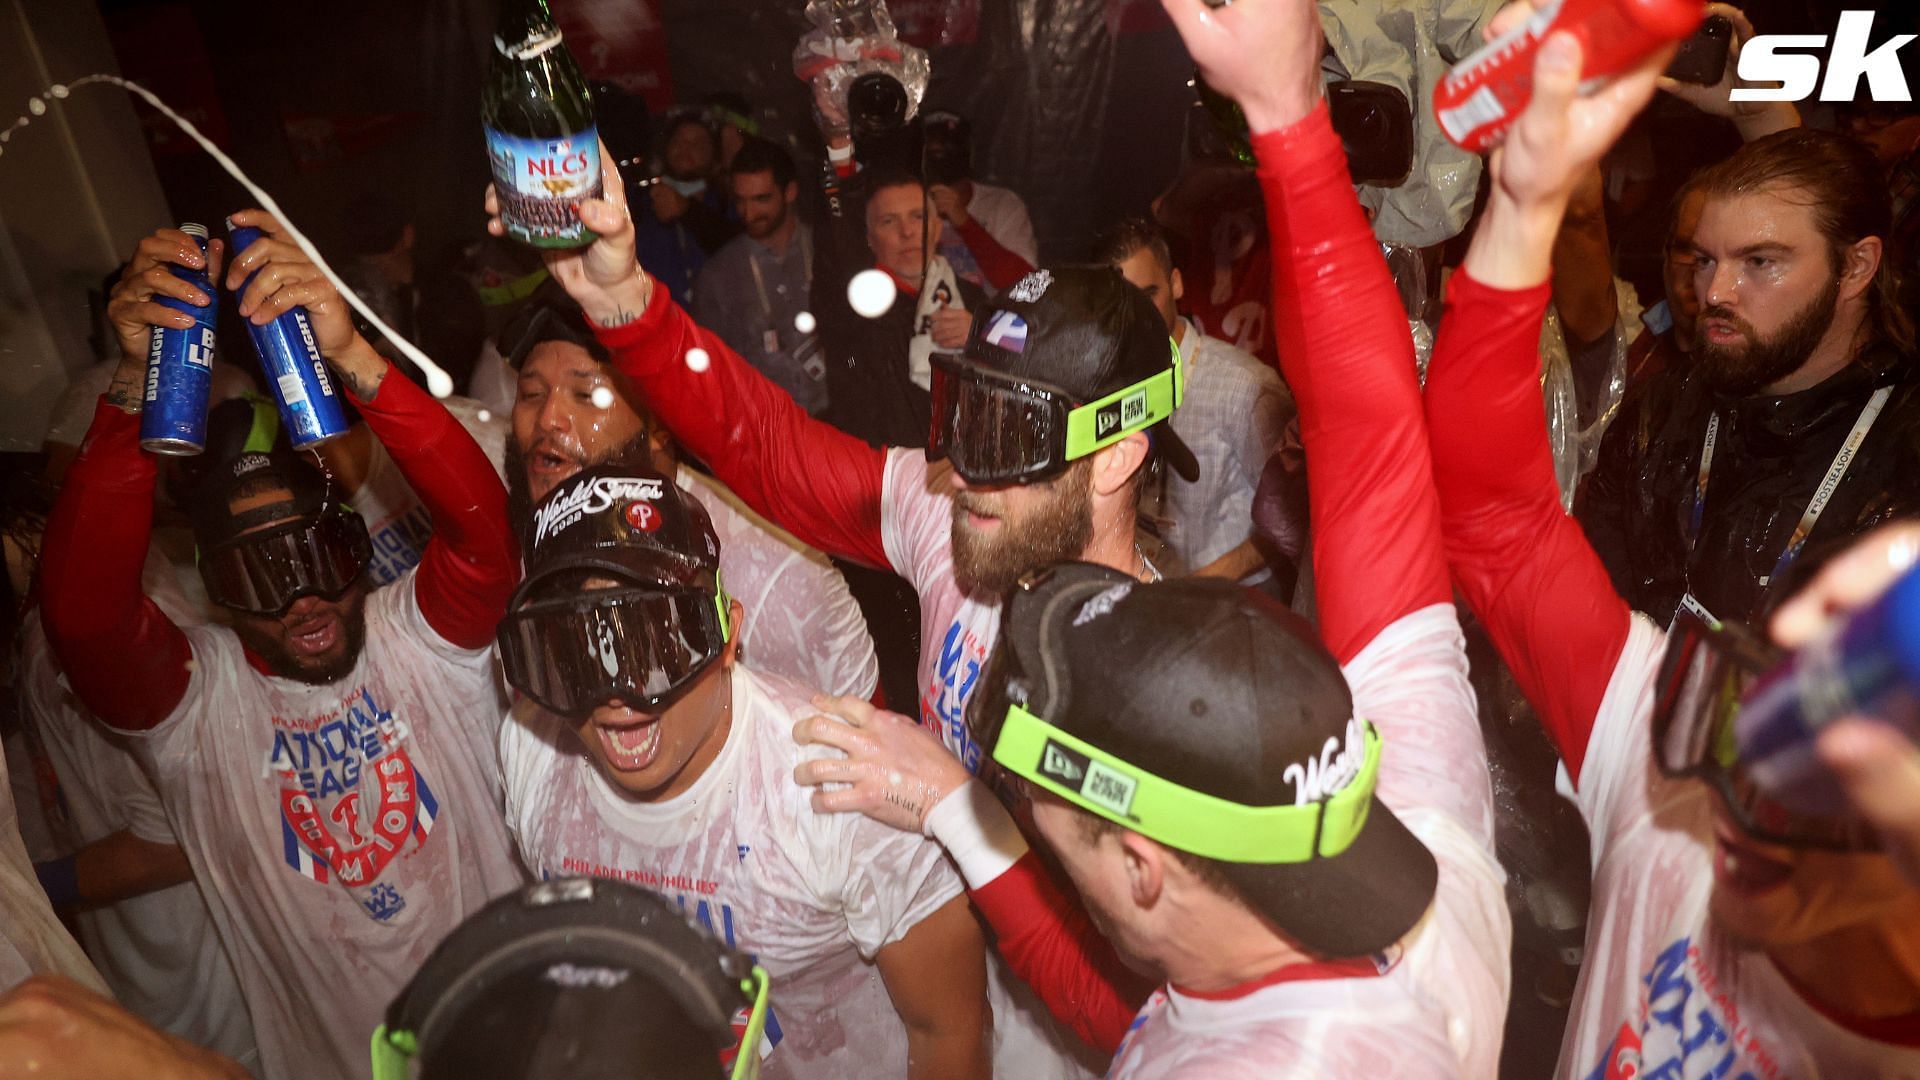 A Philadelphia Phillies fan chugged beers while hanging from a light pole to celebrate club